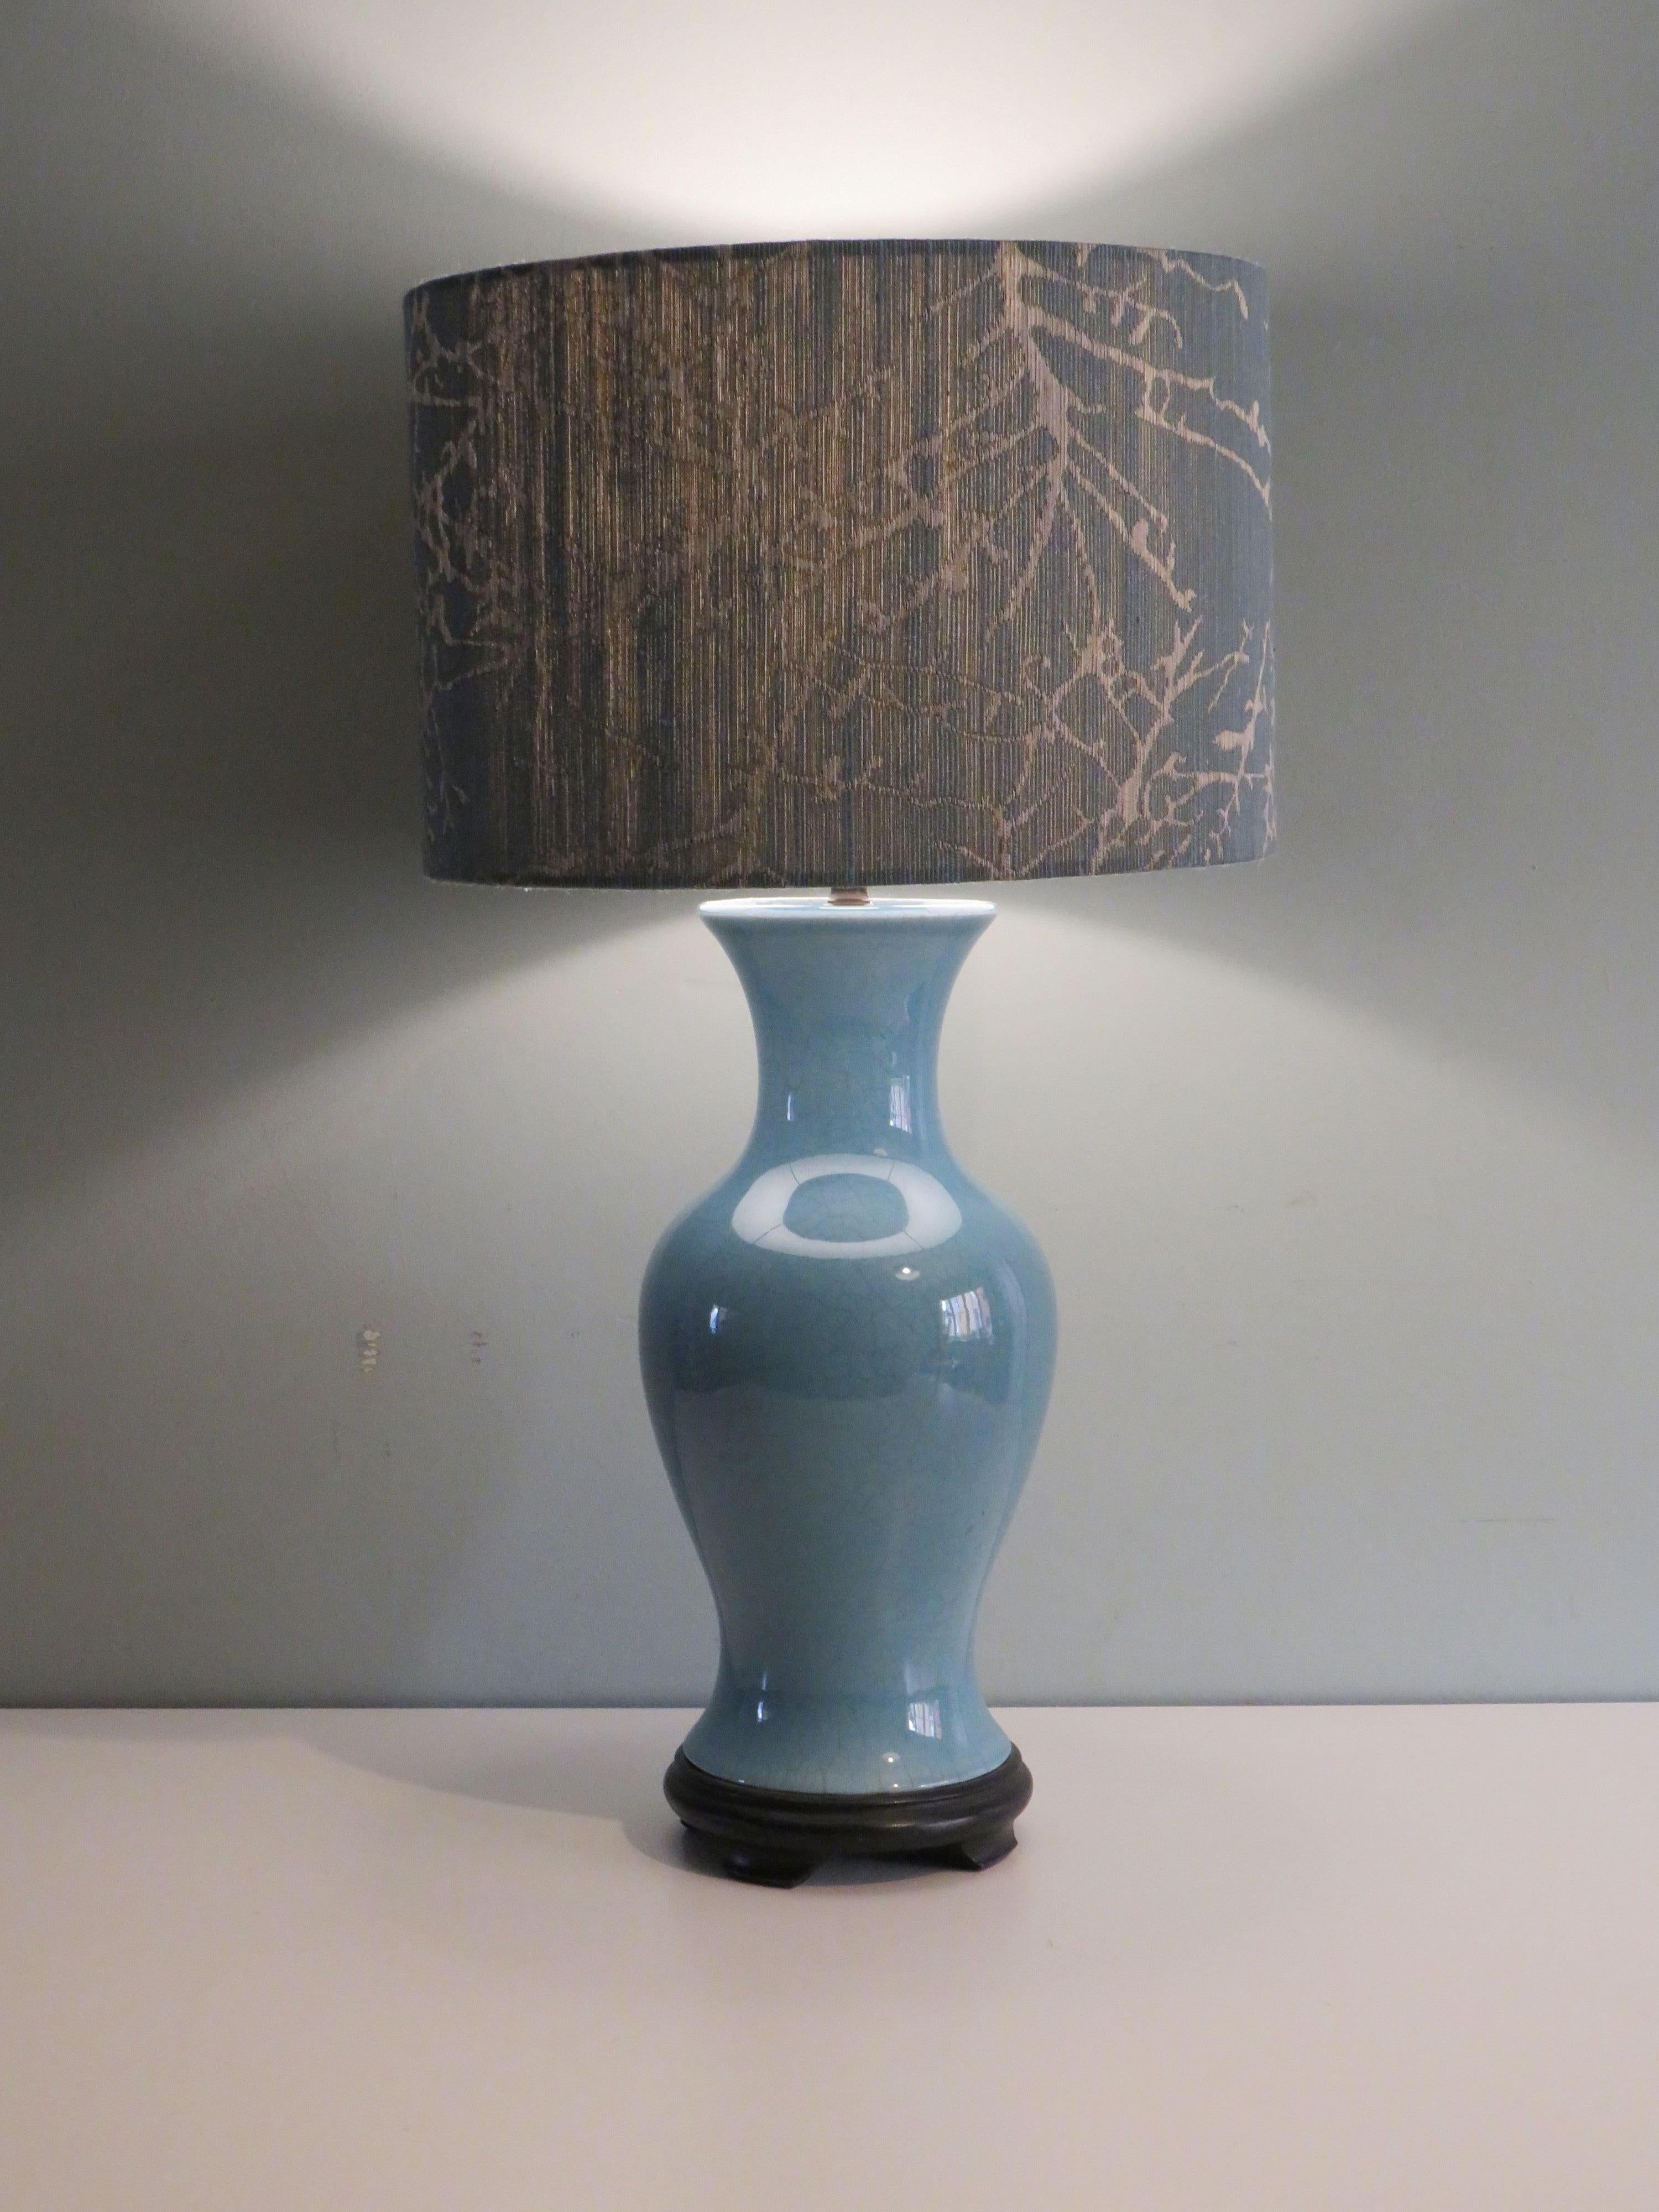 The gray-blue glazed ceramic lamp base has a very beautiful crackle and is mounted on a black wooden base.
The lamp has an E 27 fitting and an on and off button and is in very nice and working condition.
The bespoke lampshade has a blue-gray branch